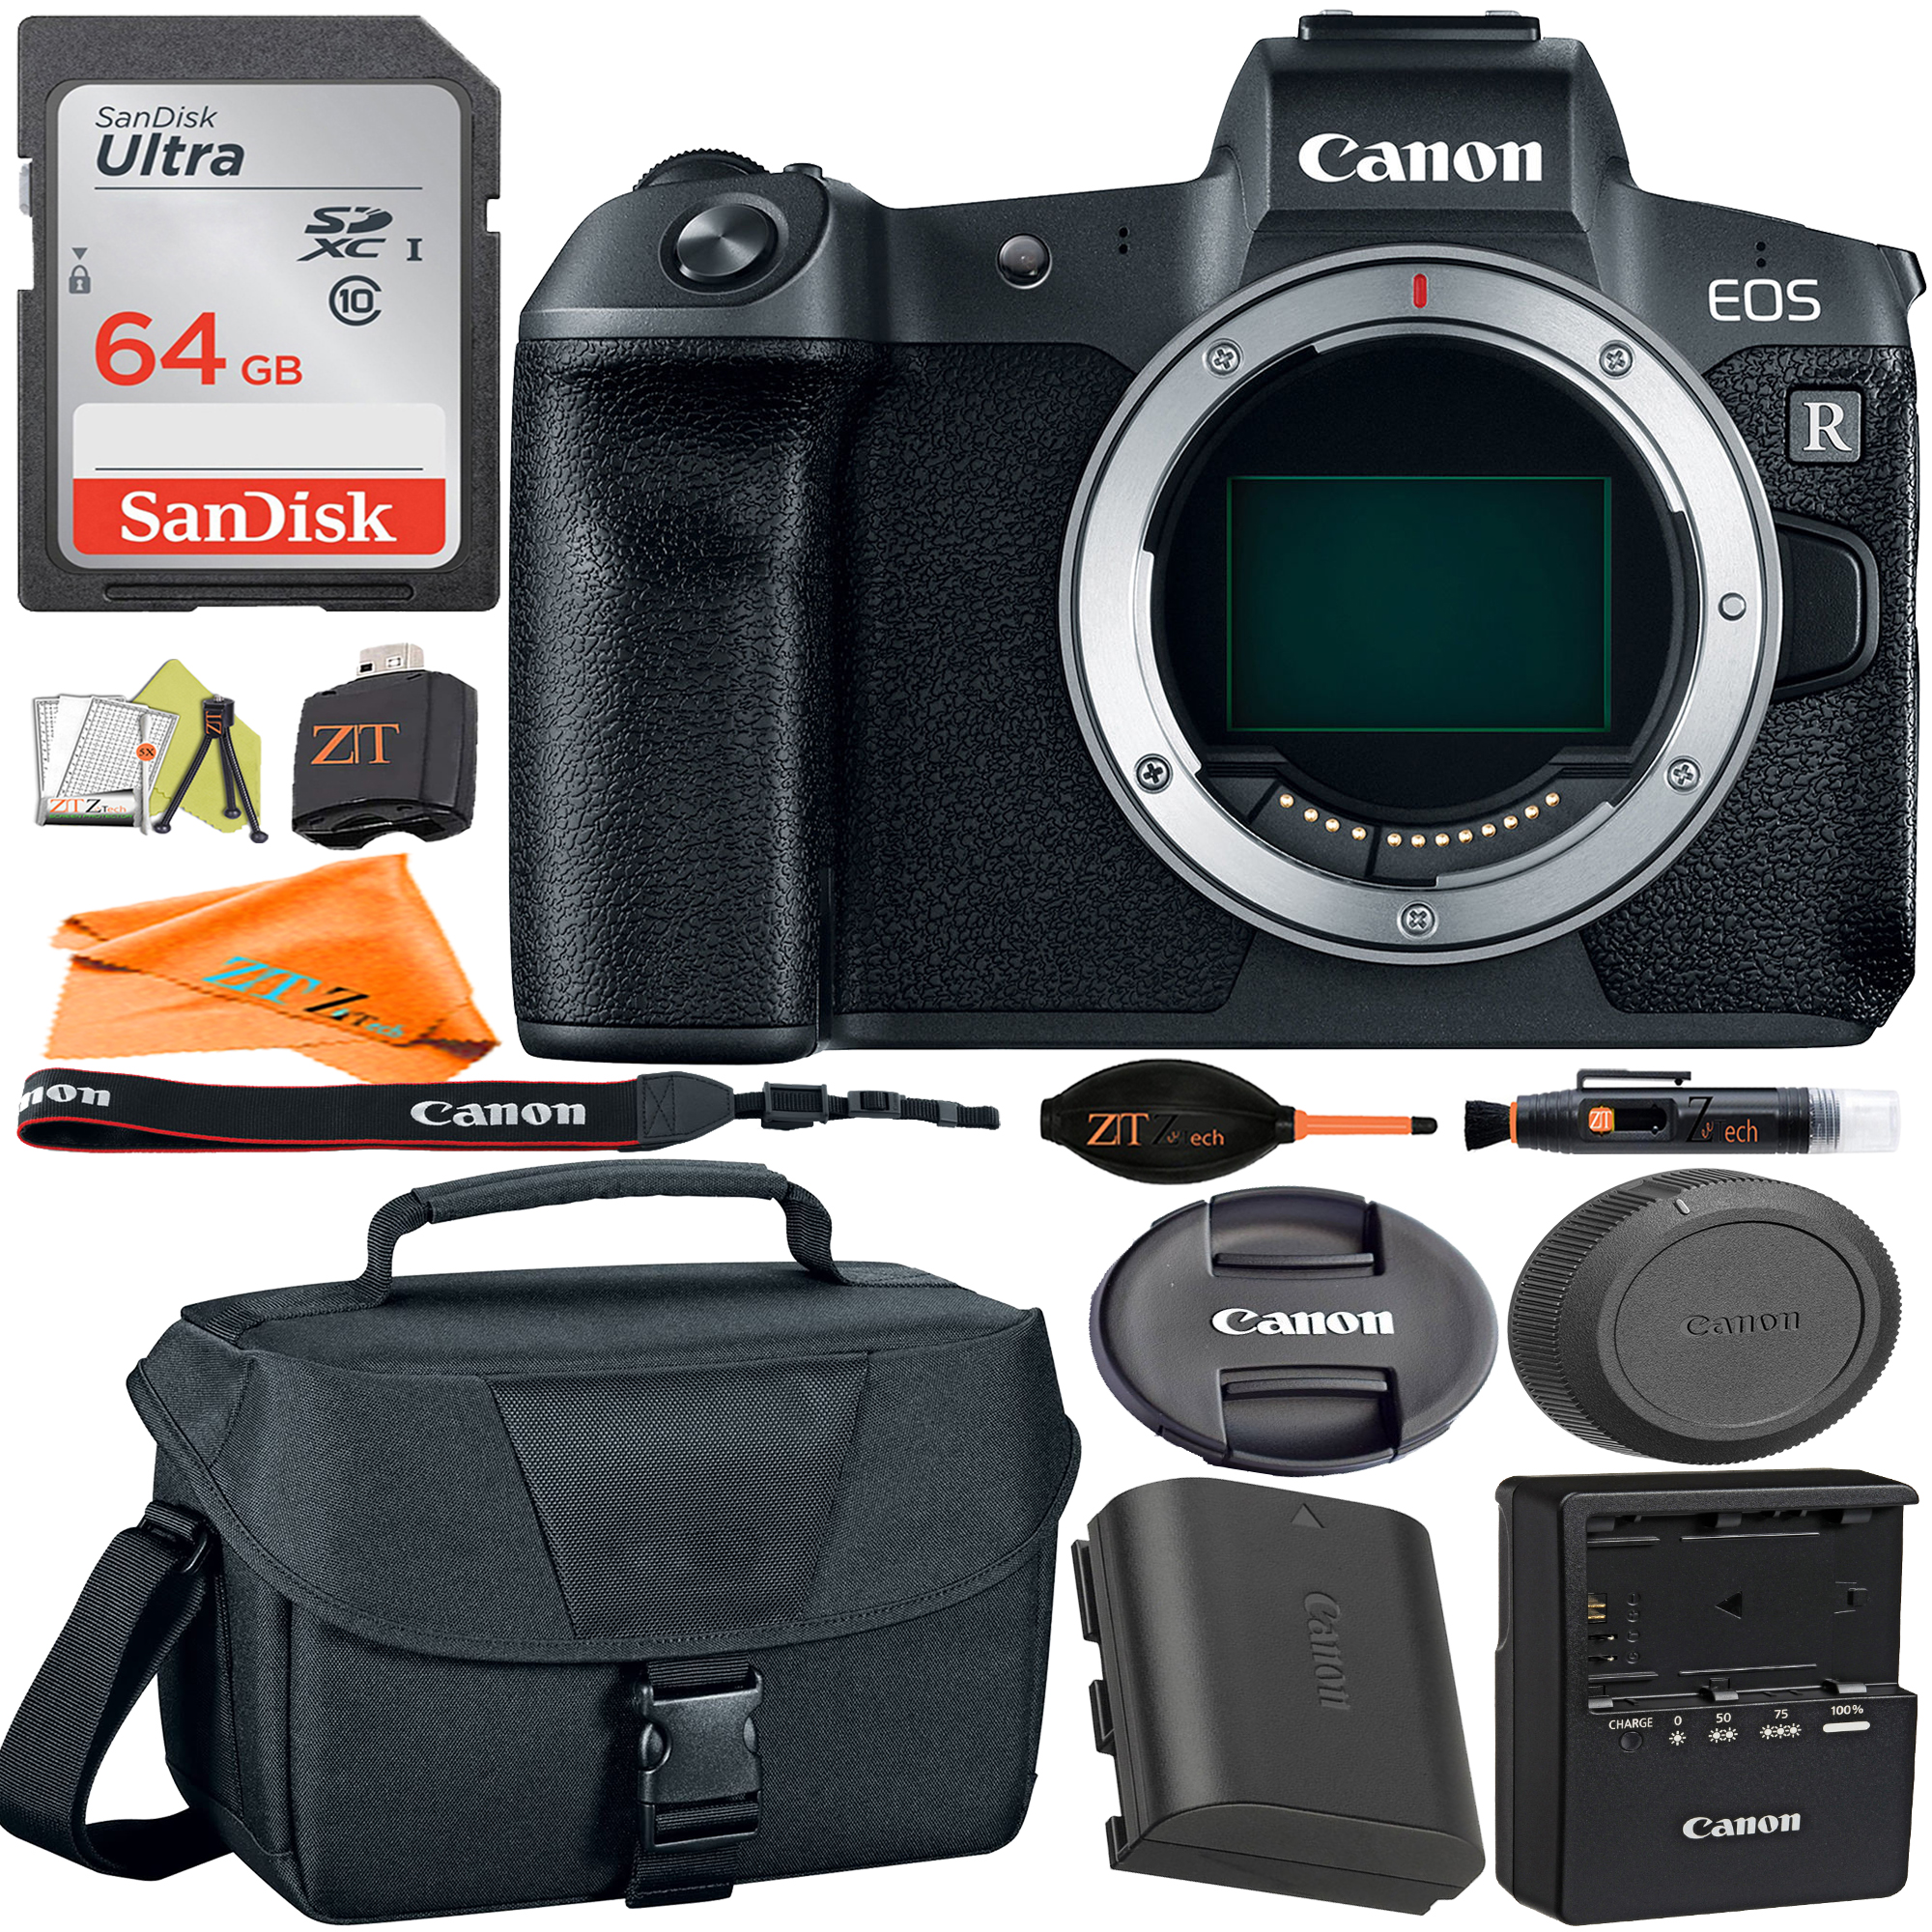 Canon EOS R Mirrorless Digital Camera (Body Only) Full-Frame with SanDisk 64GB + Case + ZeeTech Accessory Bundle